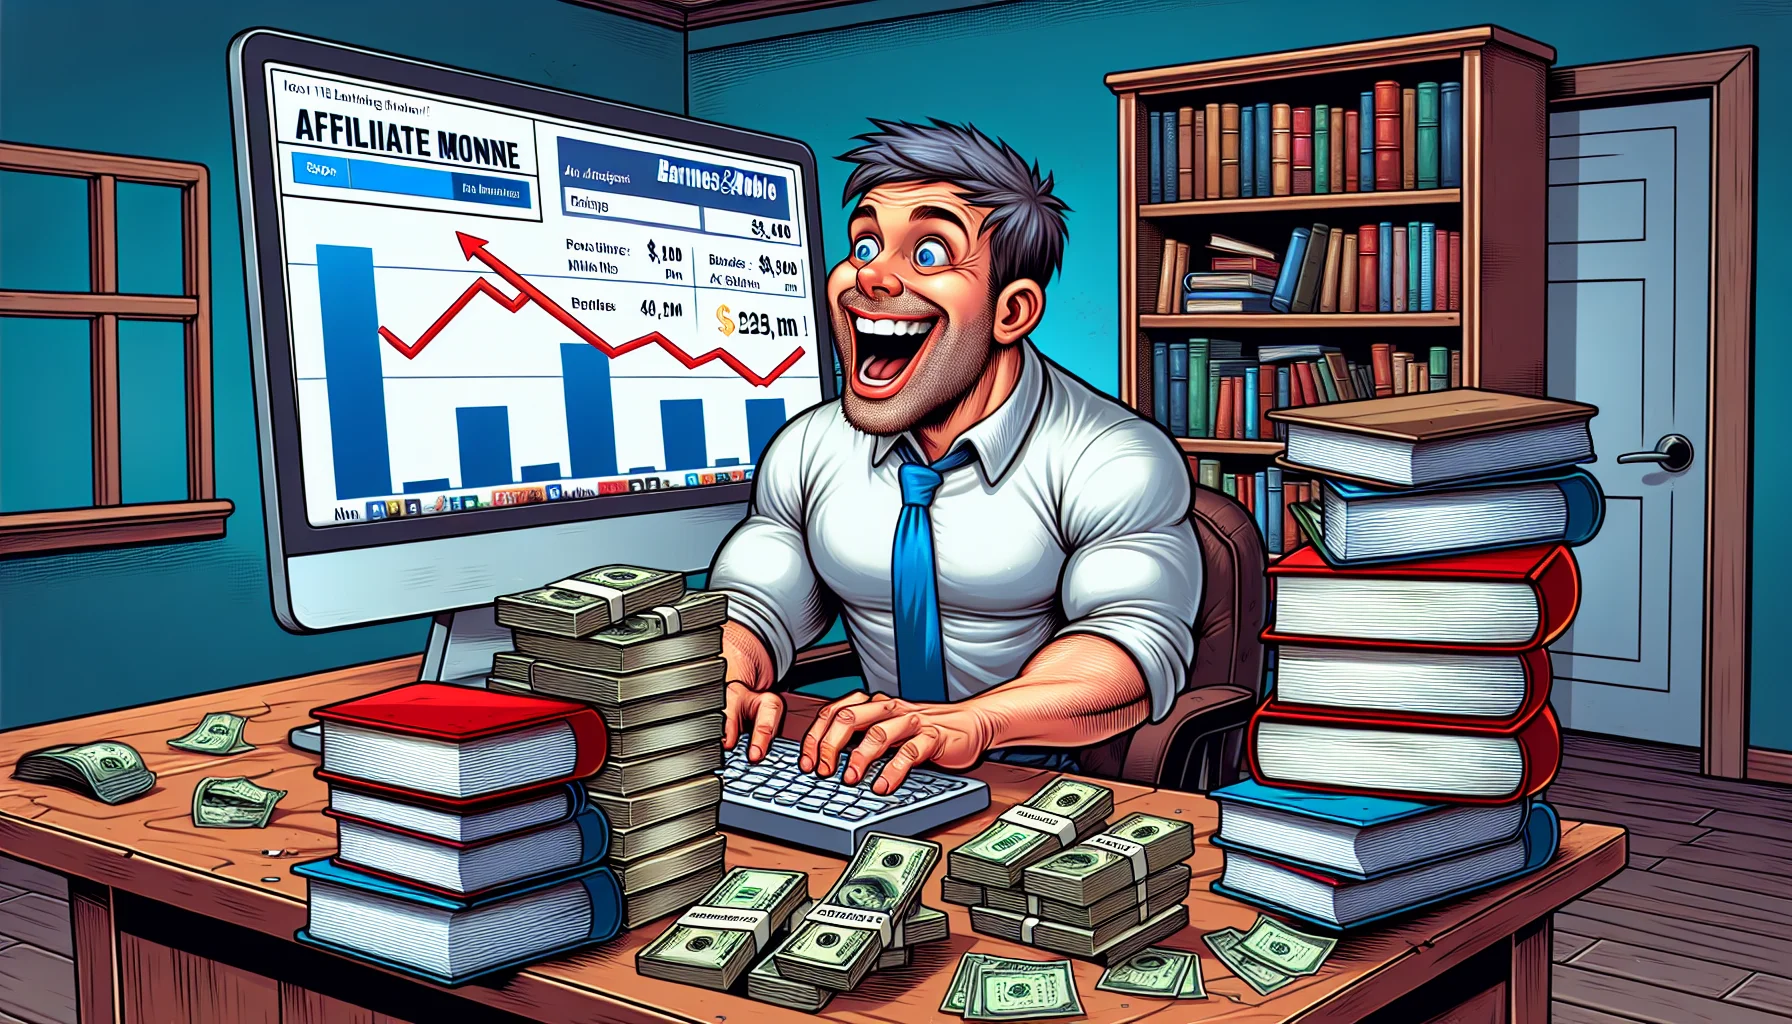 Illustrate a humorous and lifelike scene relating to making money online. In the central part of the image depict an average-looking Caucasian male, sitting at a cluttered desk filled with books, in an affiliate marketing environment. He is wearing an excited expression as he watches numbers rise on his computer screen, bringing to life the thrill of affiliate success. To subtly indicate Barnes and Noble, include a stack of books with book spines being a range of genres, but no specific branding. The background should provide an impression of a home office, hinting toward the online work-from-home lifestyle.